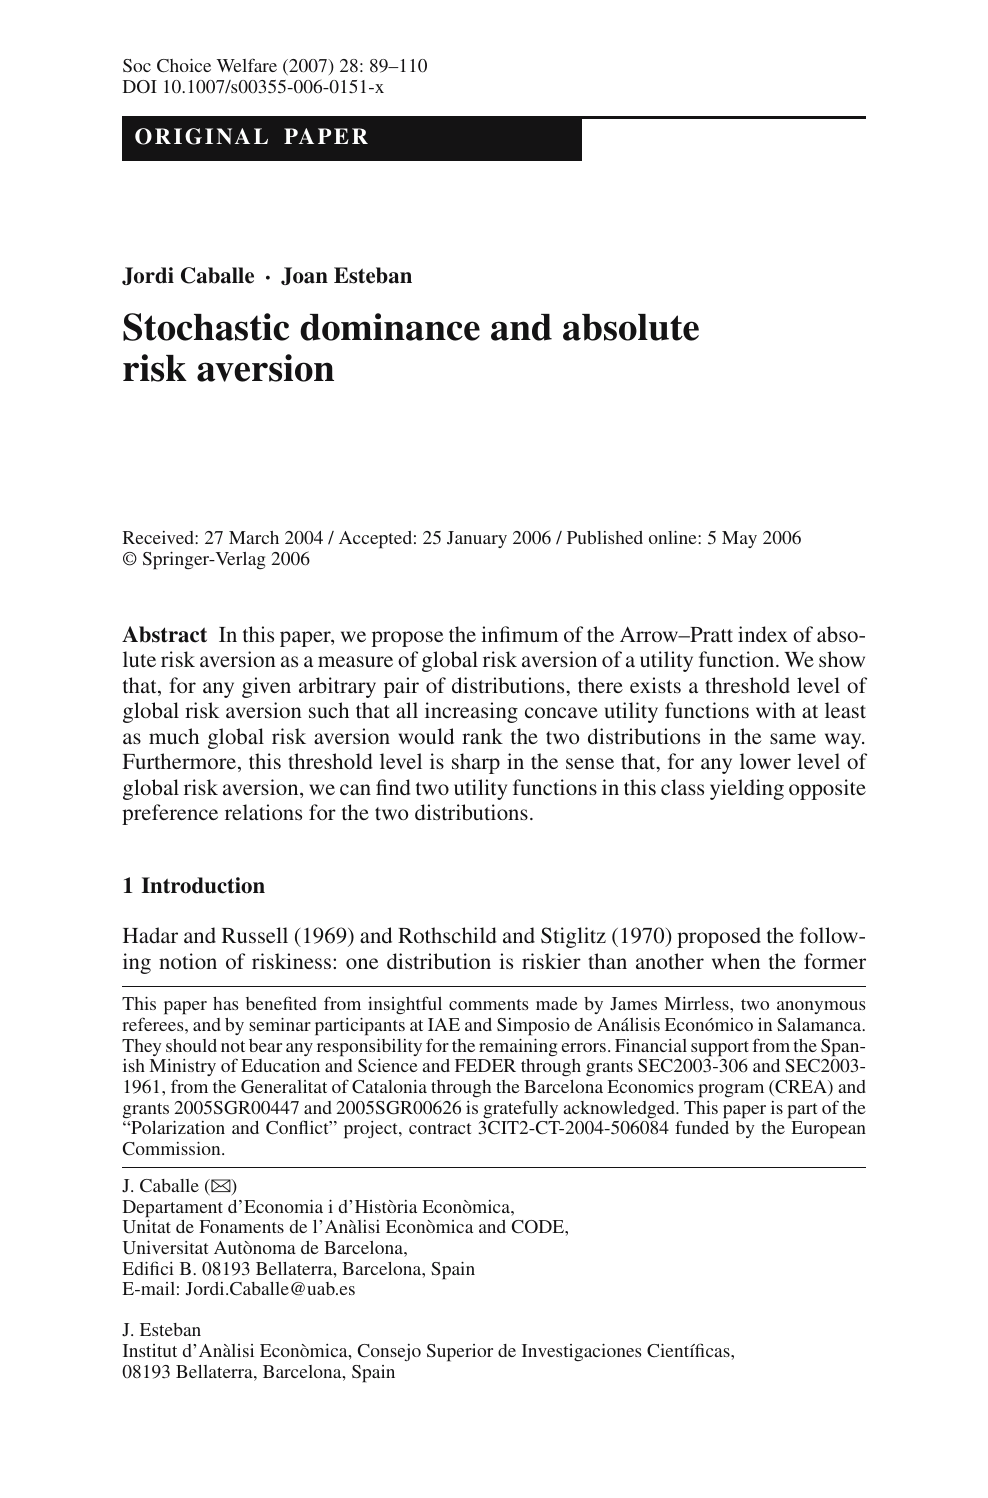 Avl Mobilisere Aftensmad Stochastic Dominance and Absolute Risk Aversion – topic of research paper  in Mathematics. Download scholarly article PDF and read for free on  CyberLeninka open science hub.